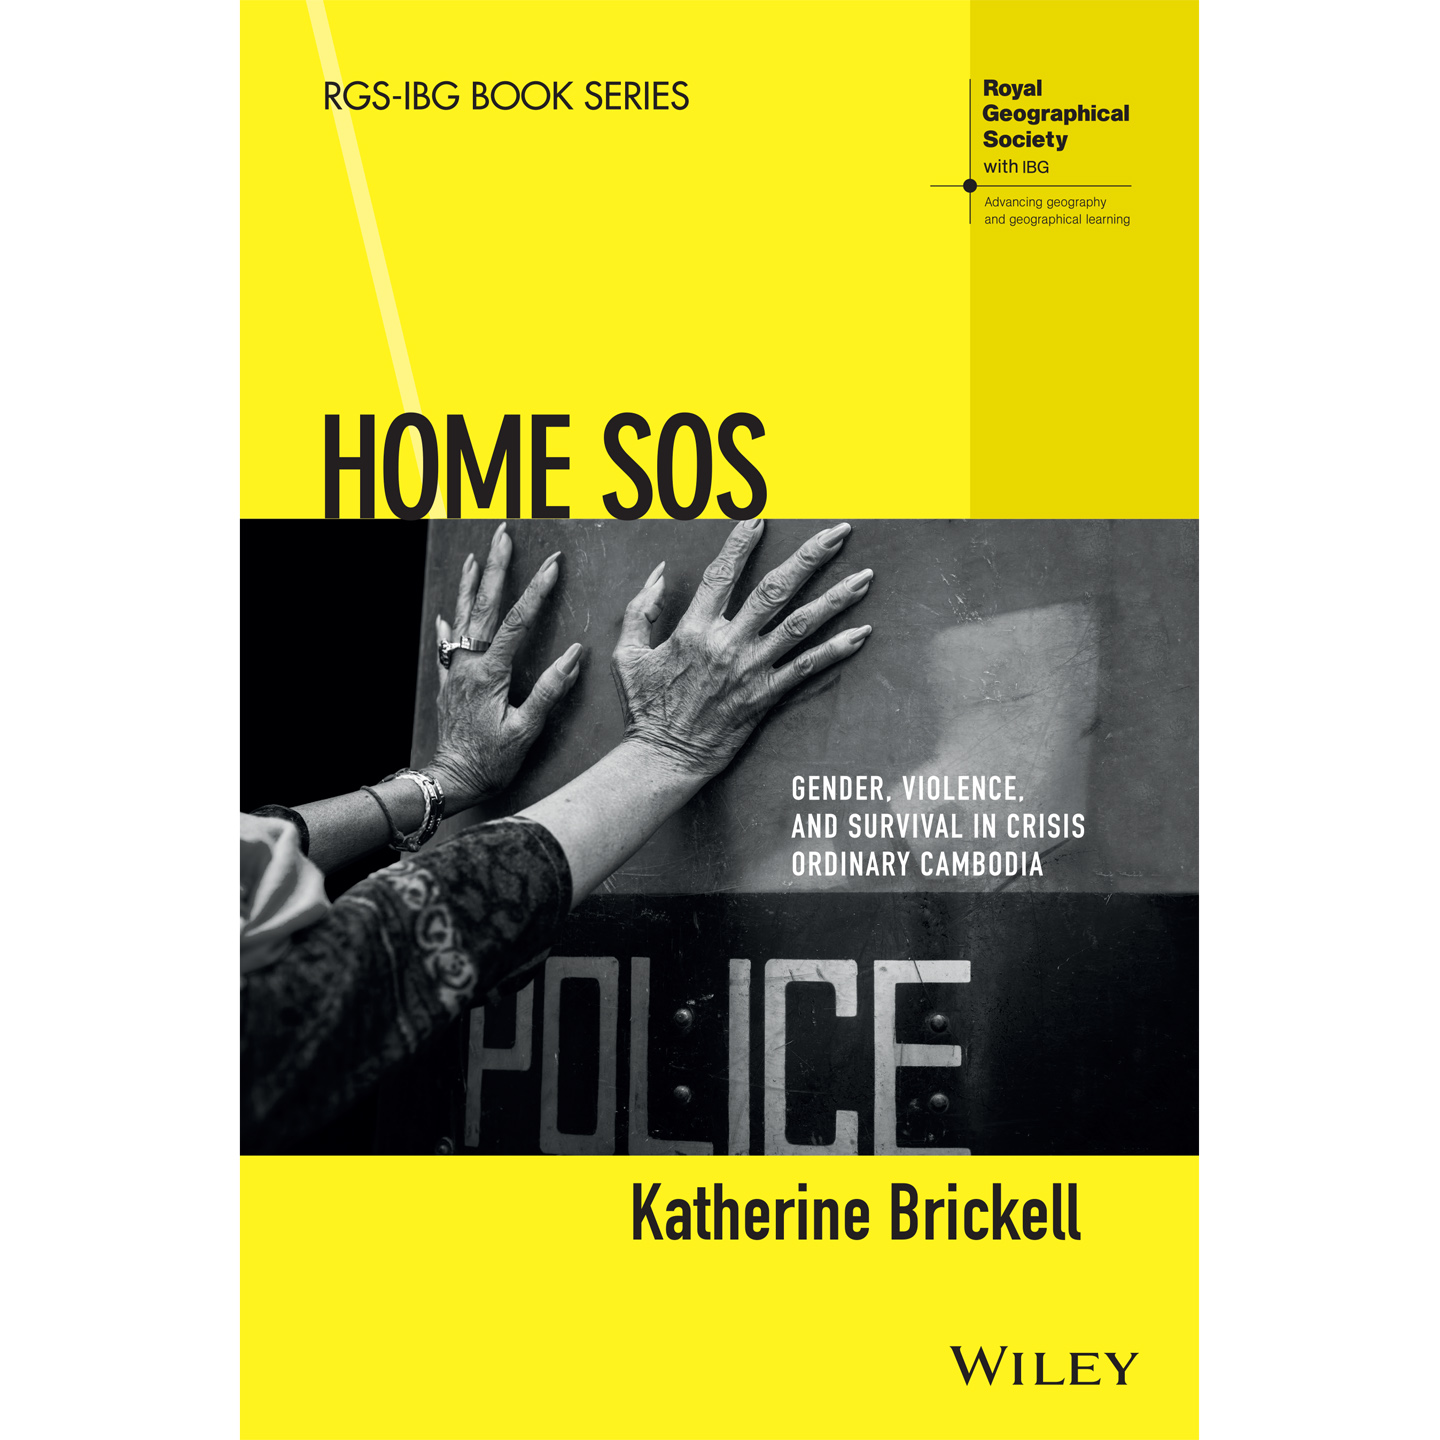 Home SOS cover (c) Wiley